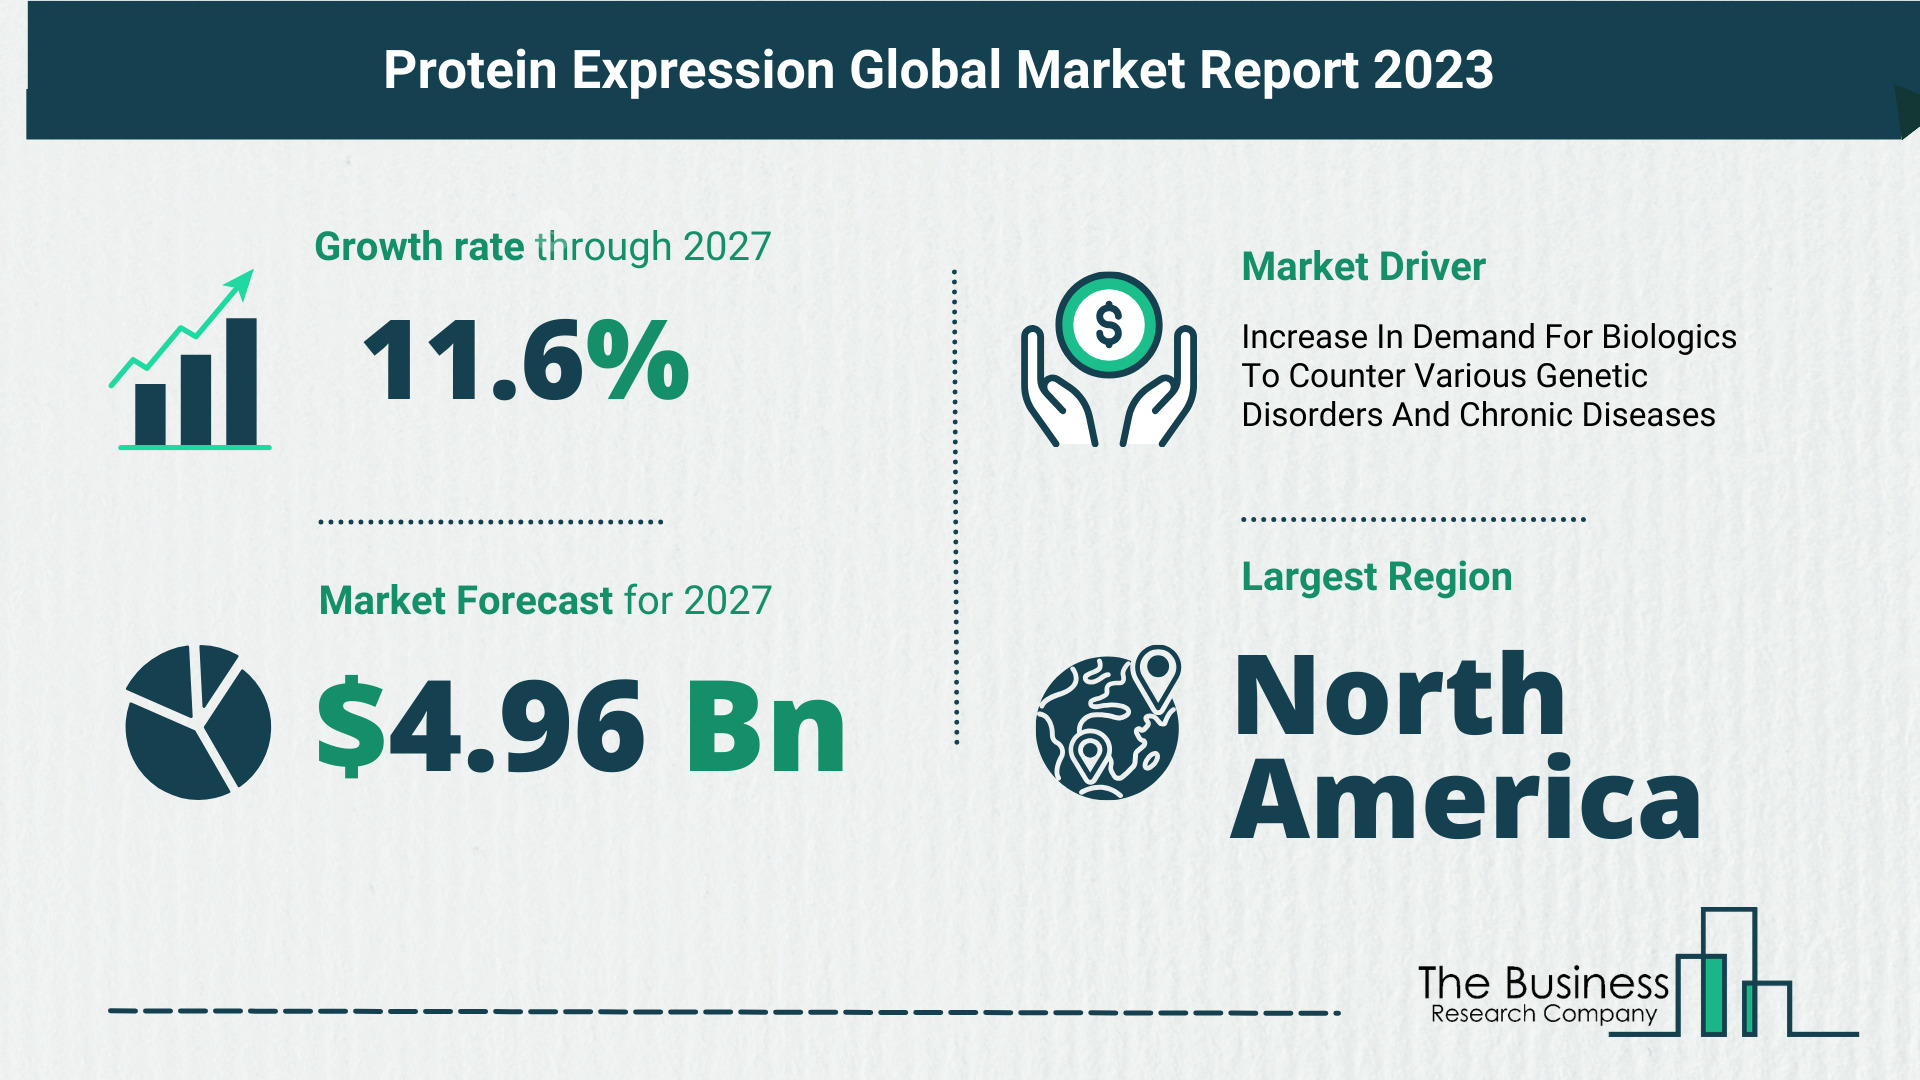 Top 5 Insights From The Protein Expression Market Report 2023